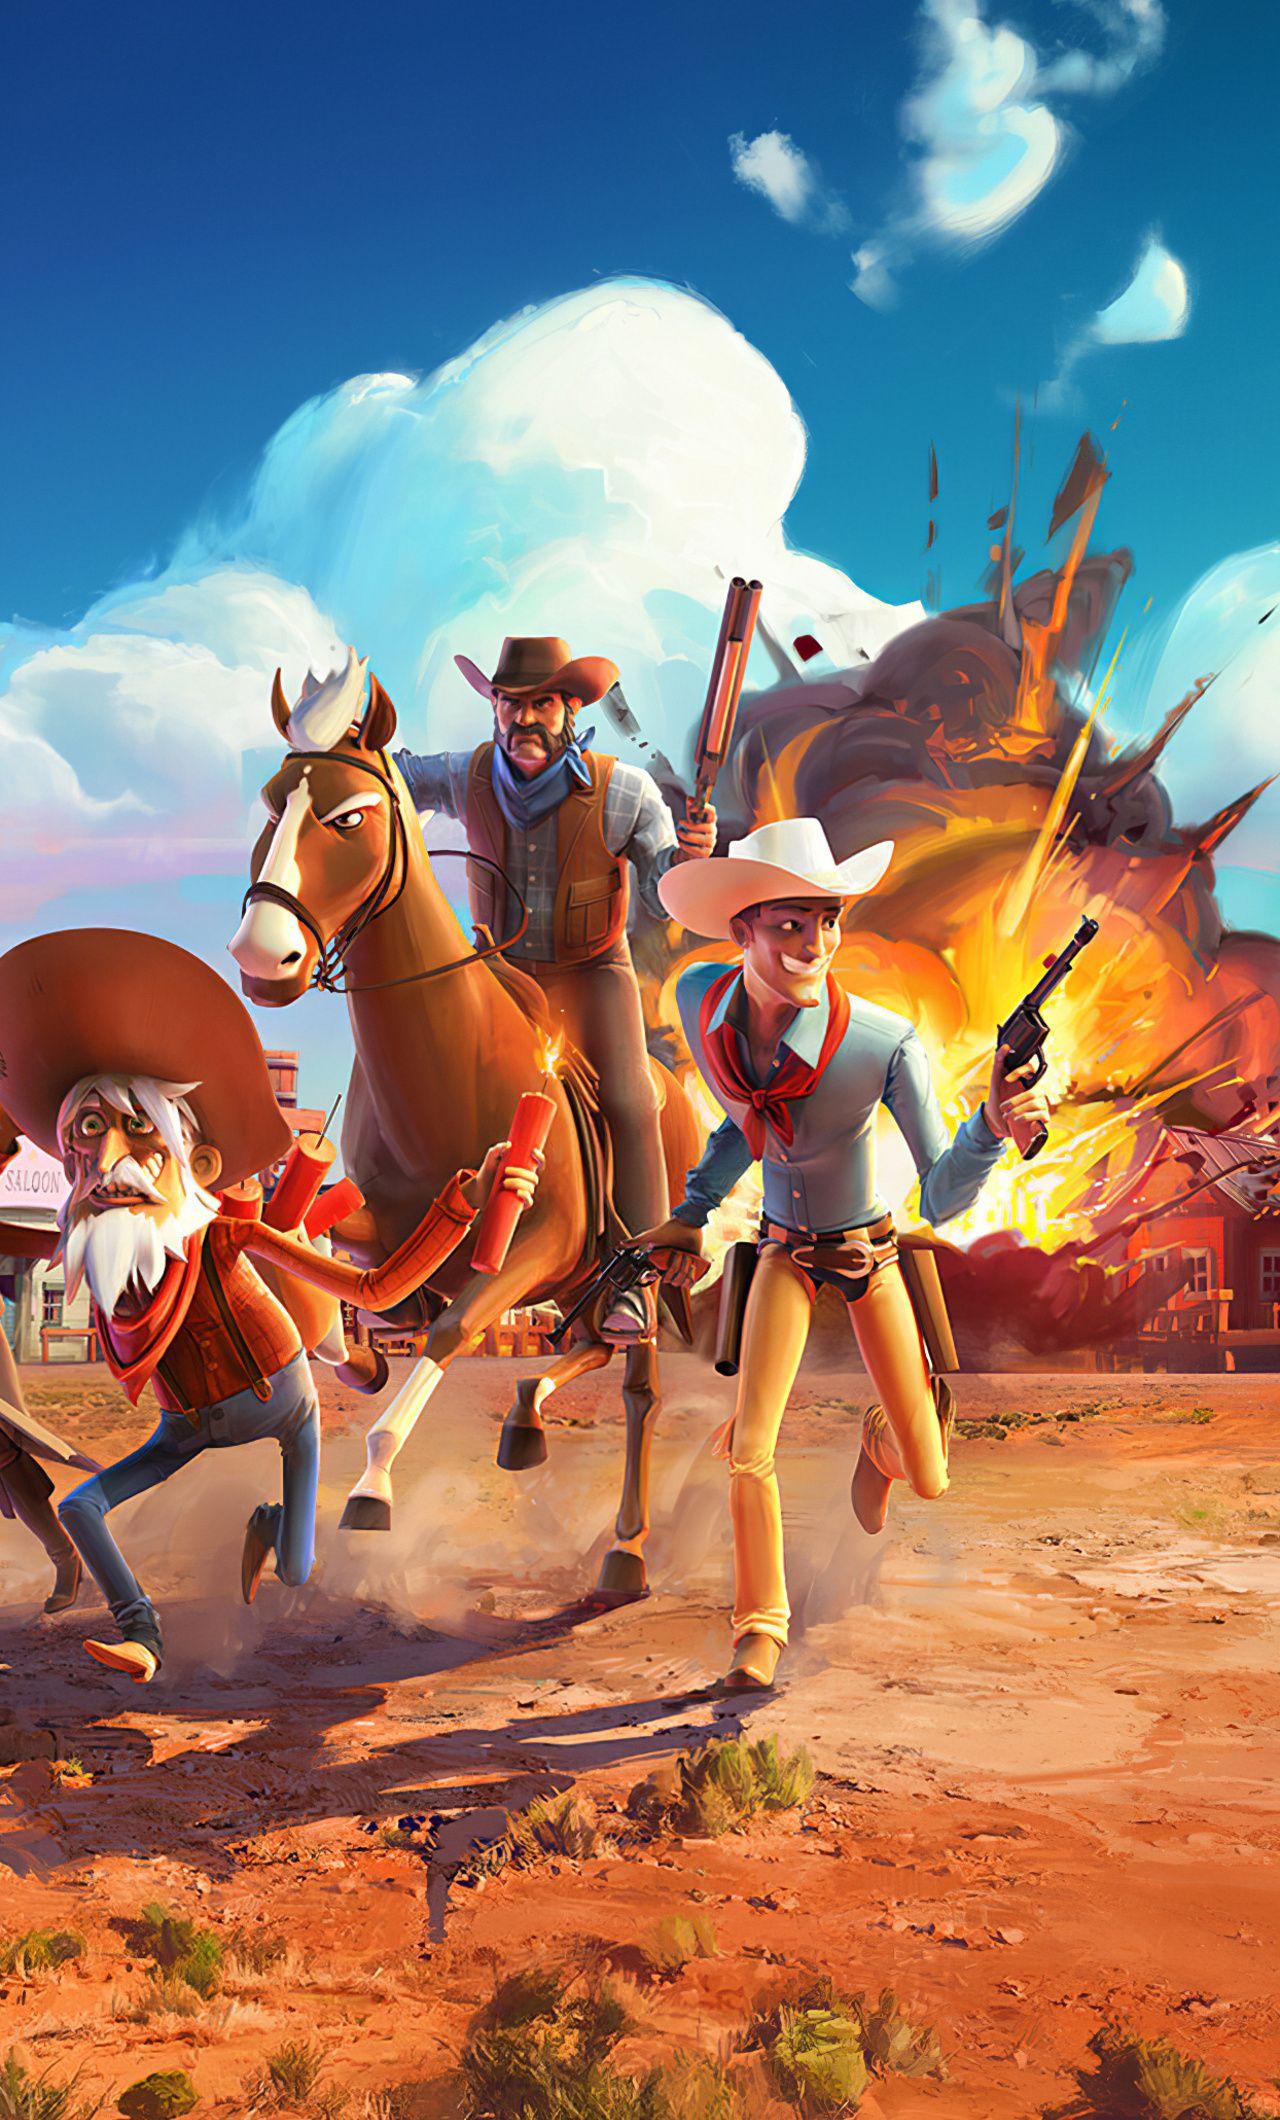 Artistic Western HD Wallpapers and Backgrounds